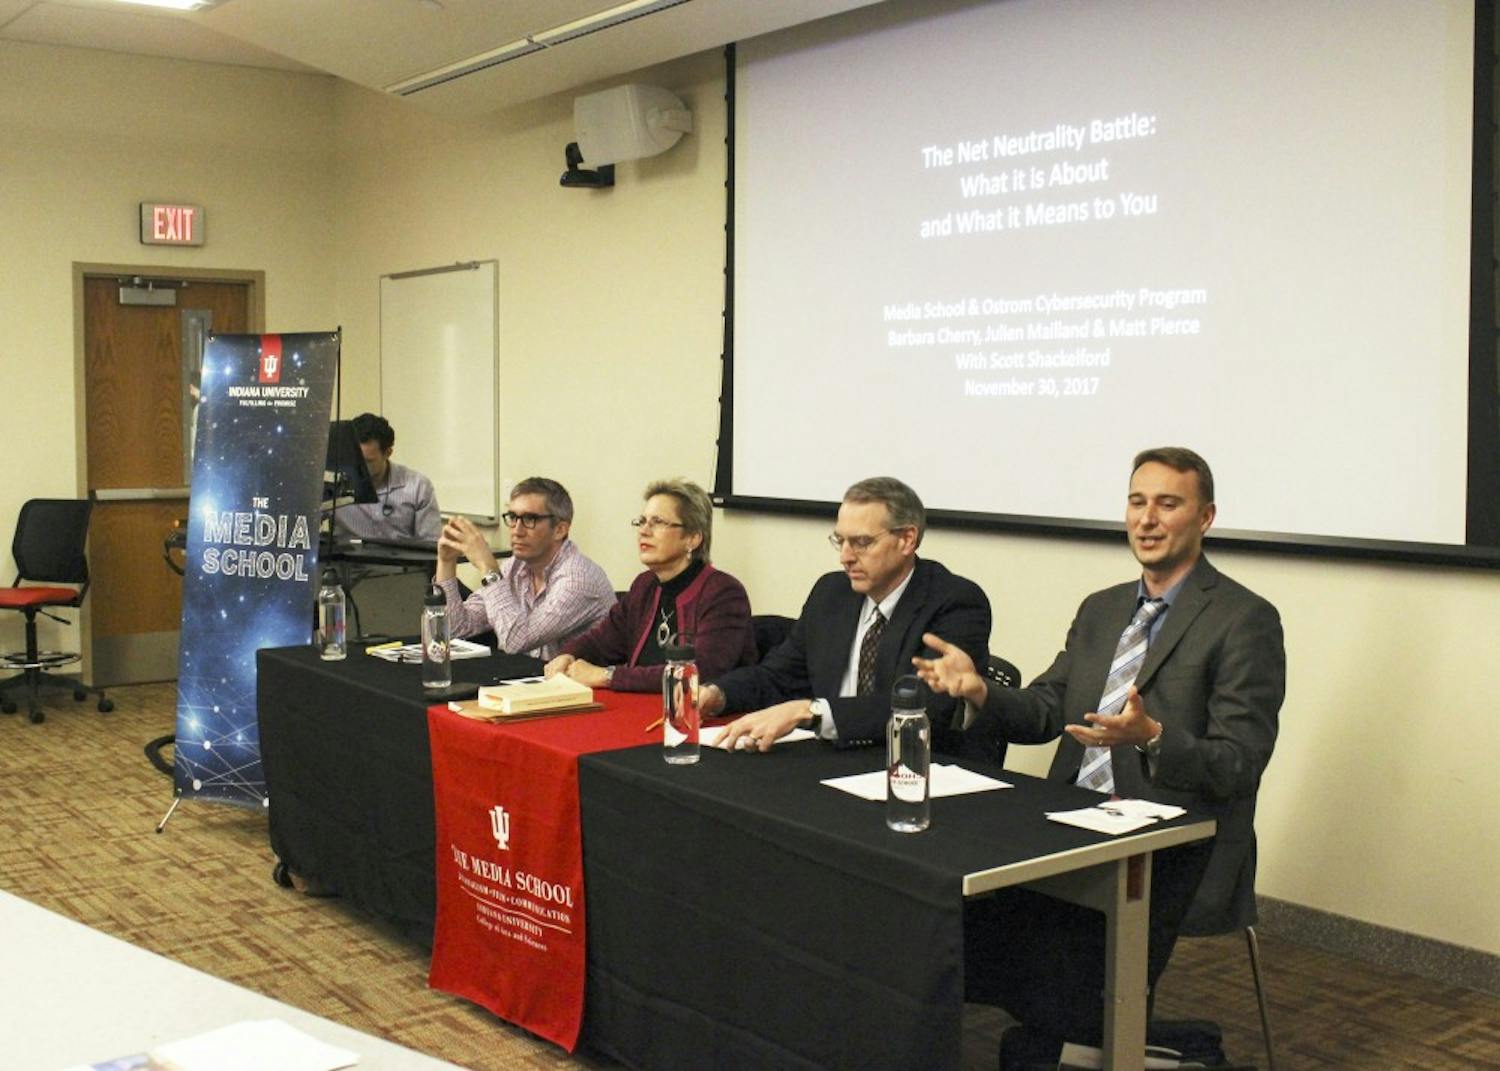 Scott Shackelford introduces the panel on net neutrality with professor Barbara Cherry, assistant professor Julien Mailland and senior lecturer Matt Pierce. The panel was hosted by the Media School and the Ostrom Cybersecurity Program.